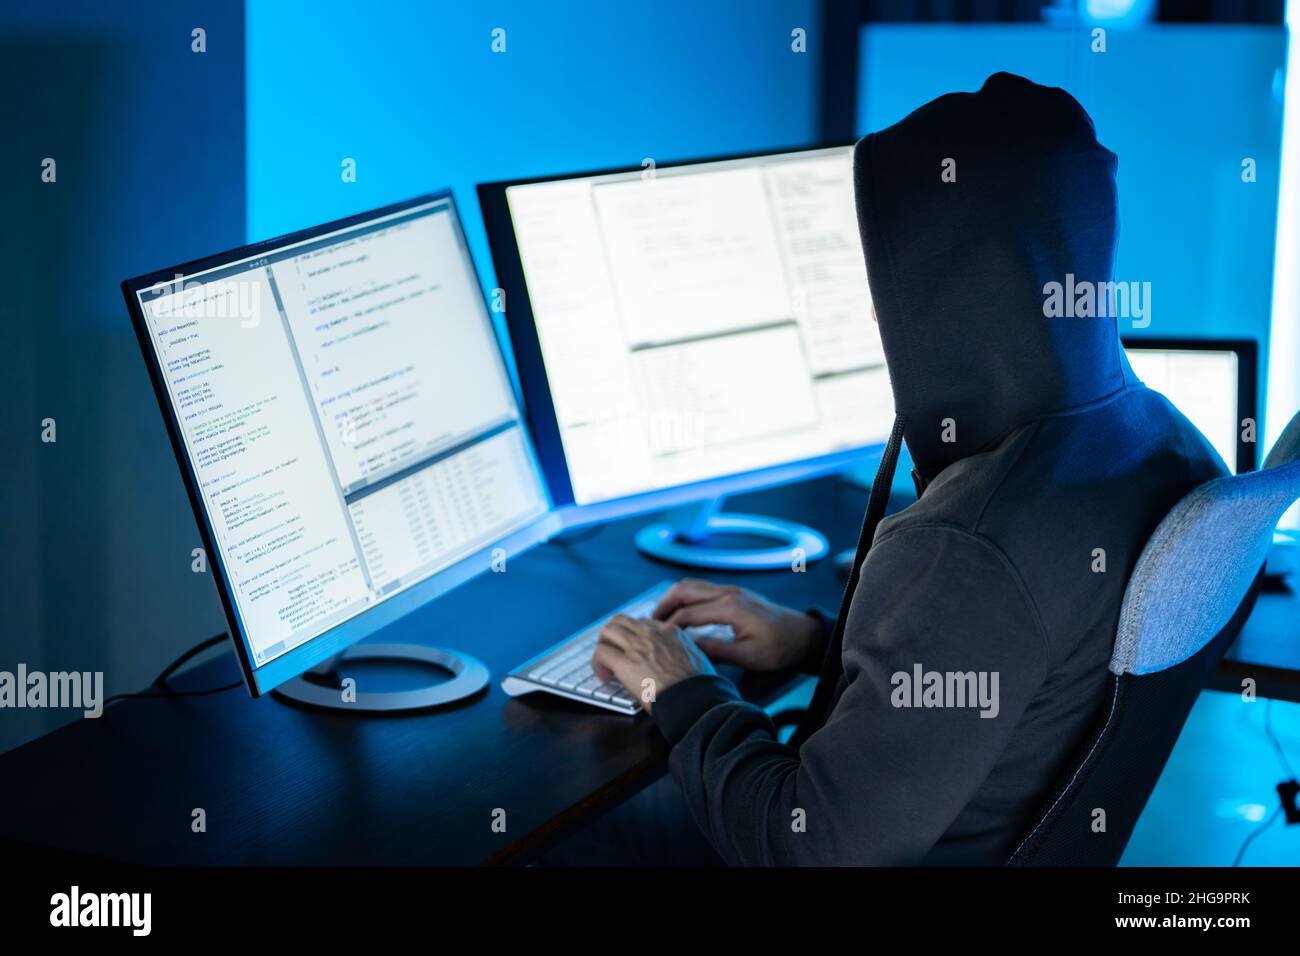 Hacker Using Computer To Write Cyber Security Exploit Software Program Stock Photo